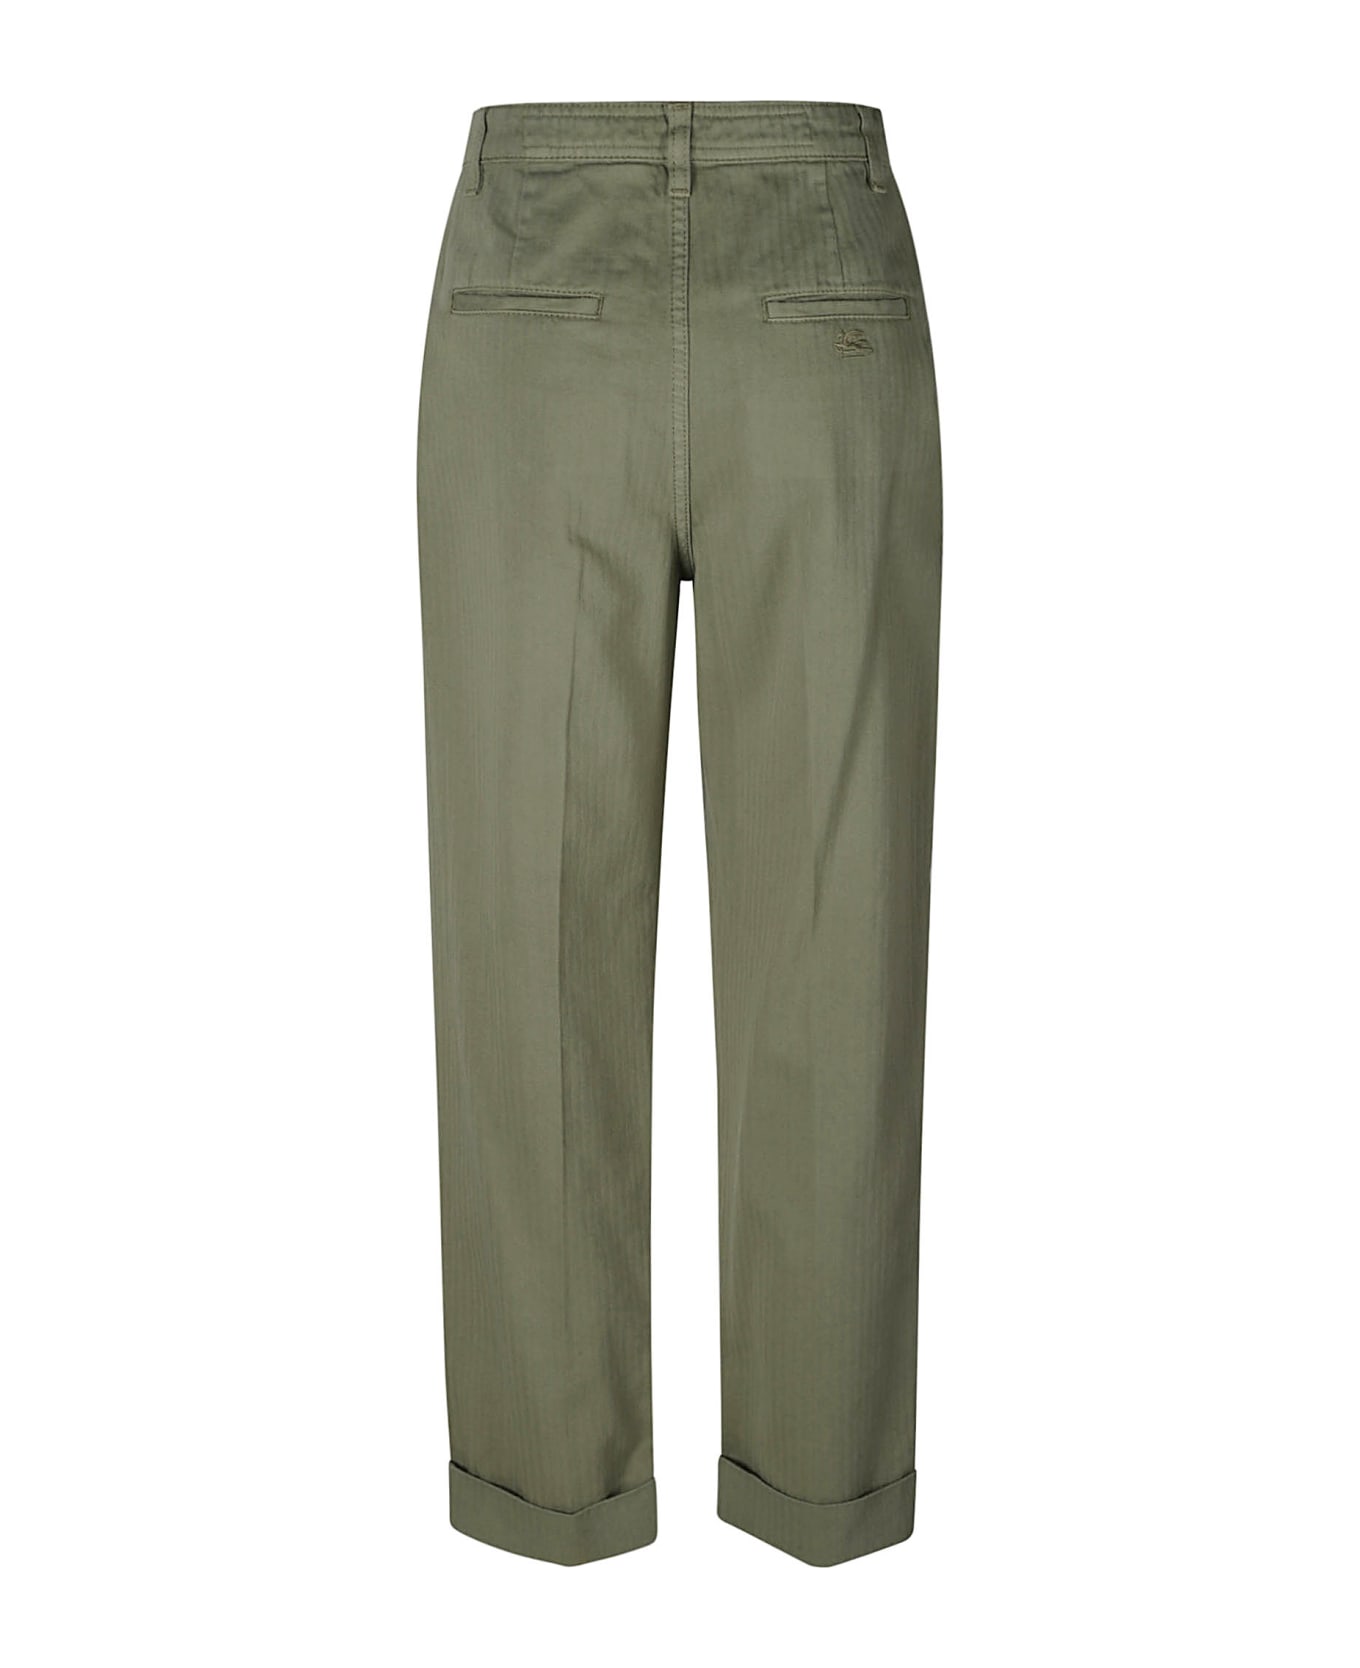 Etro Cropped Chino Trousers - Green